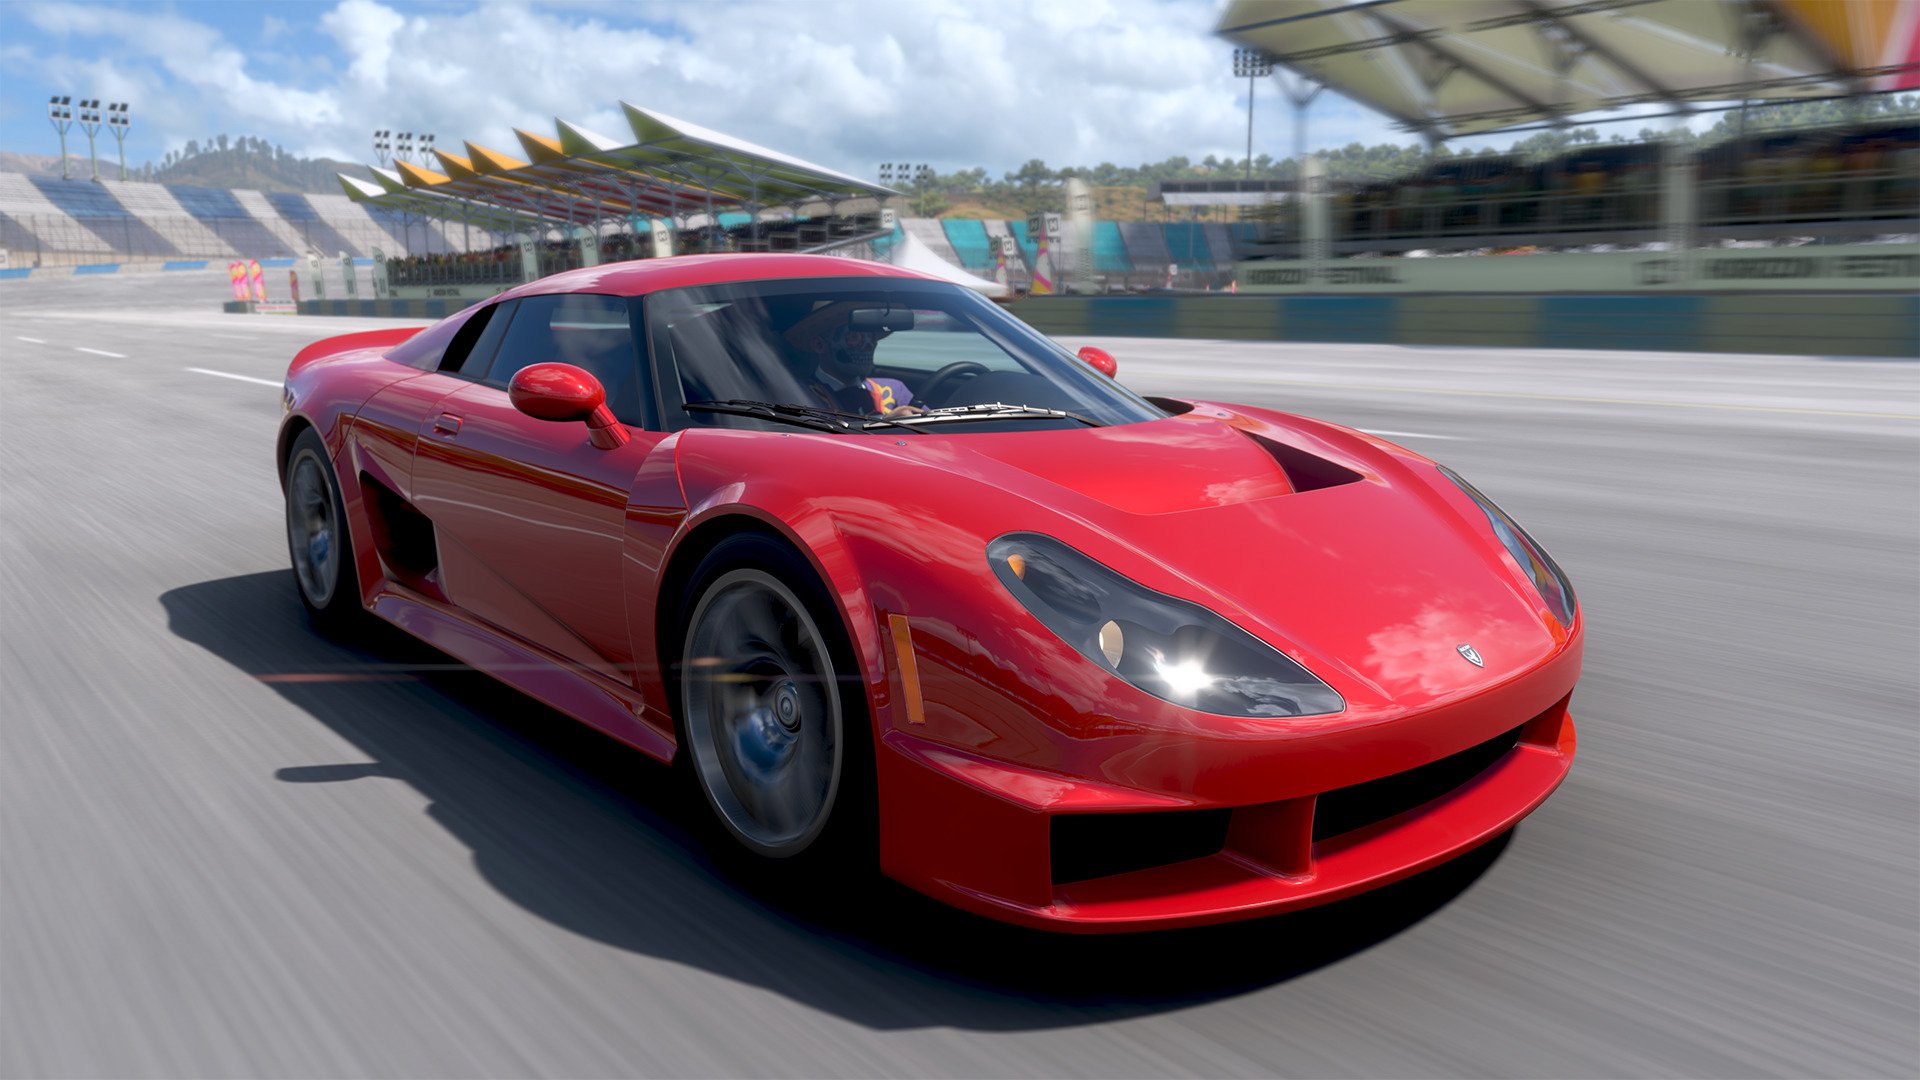 Forza Motorsport 5 is coming - The AI Blog